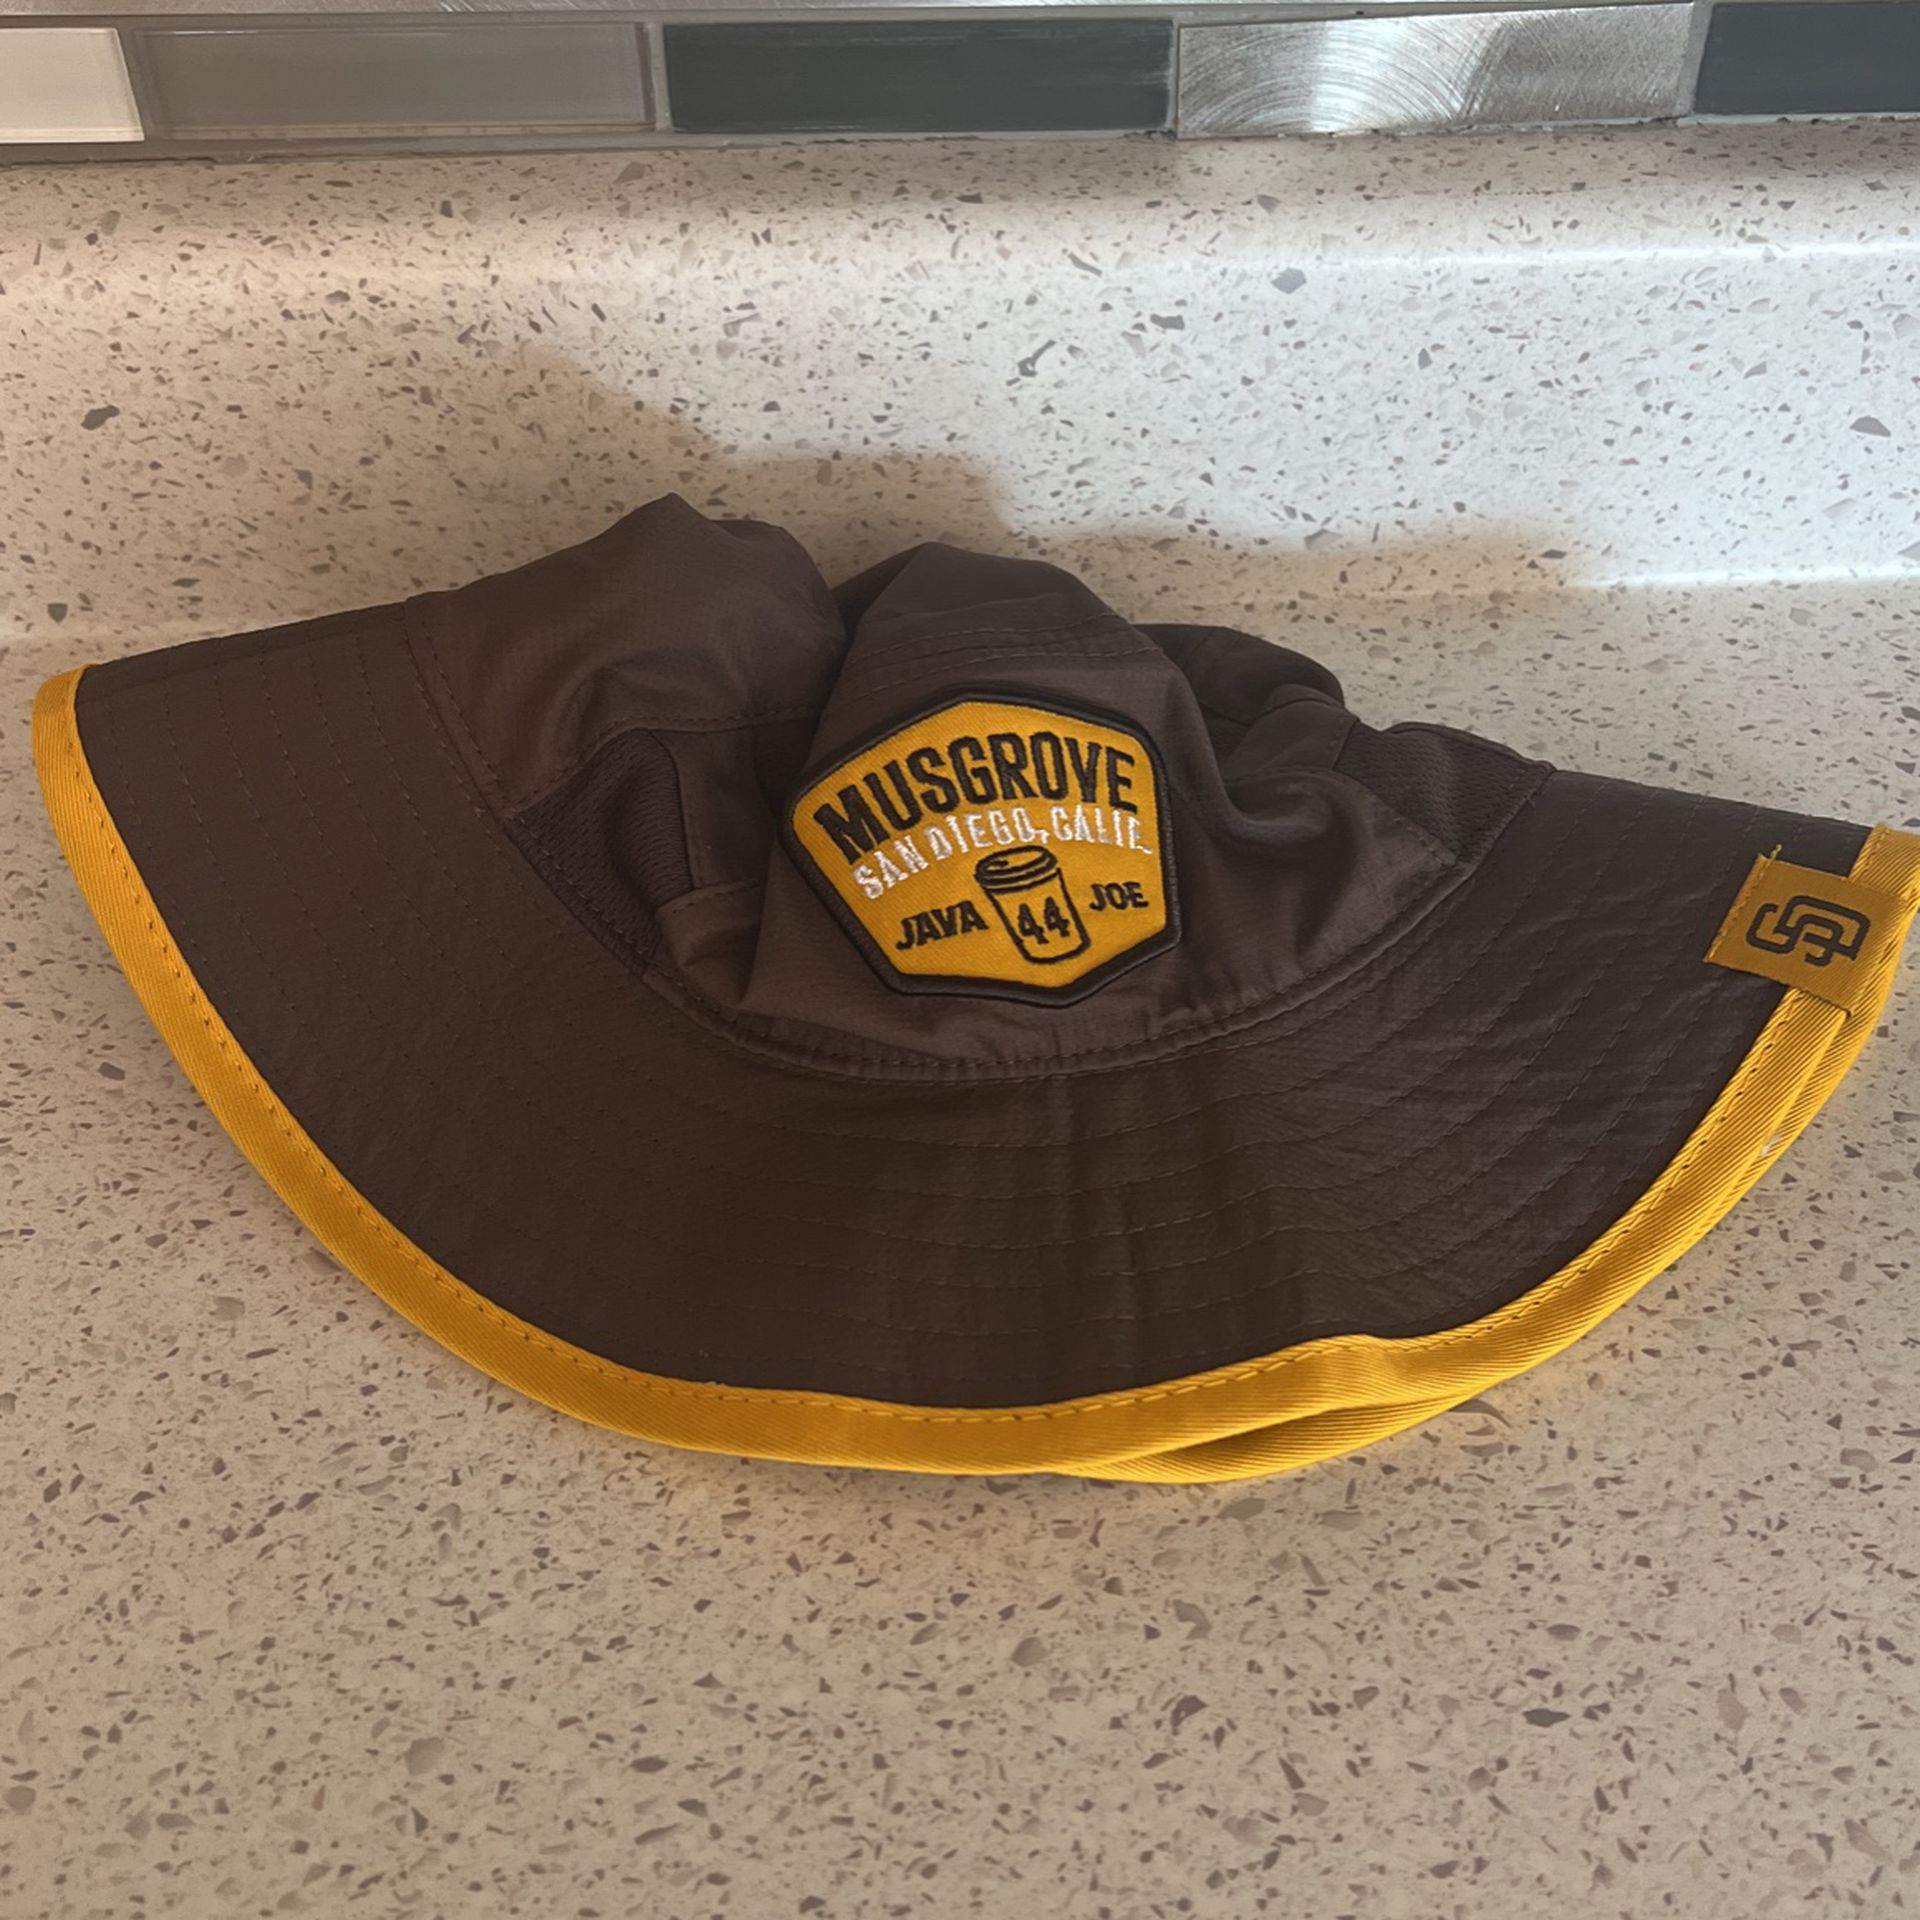 SD Padres Musgrove Bucket Hat for Sale in Chula Vista, CA - OfferUp